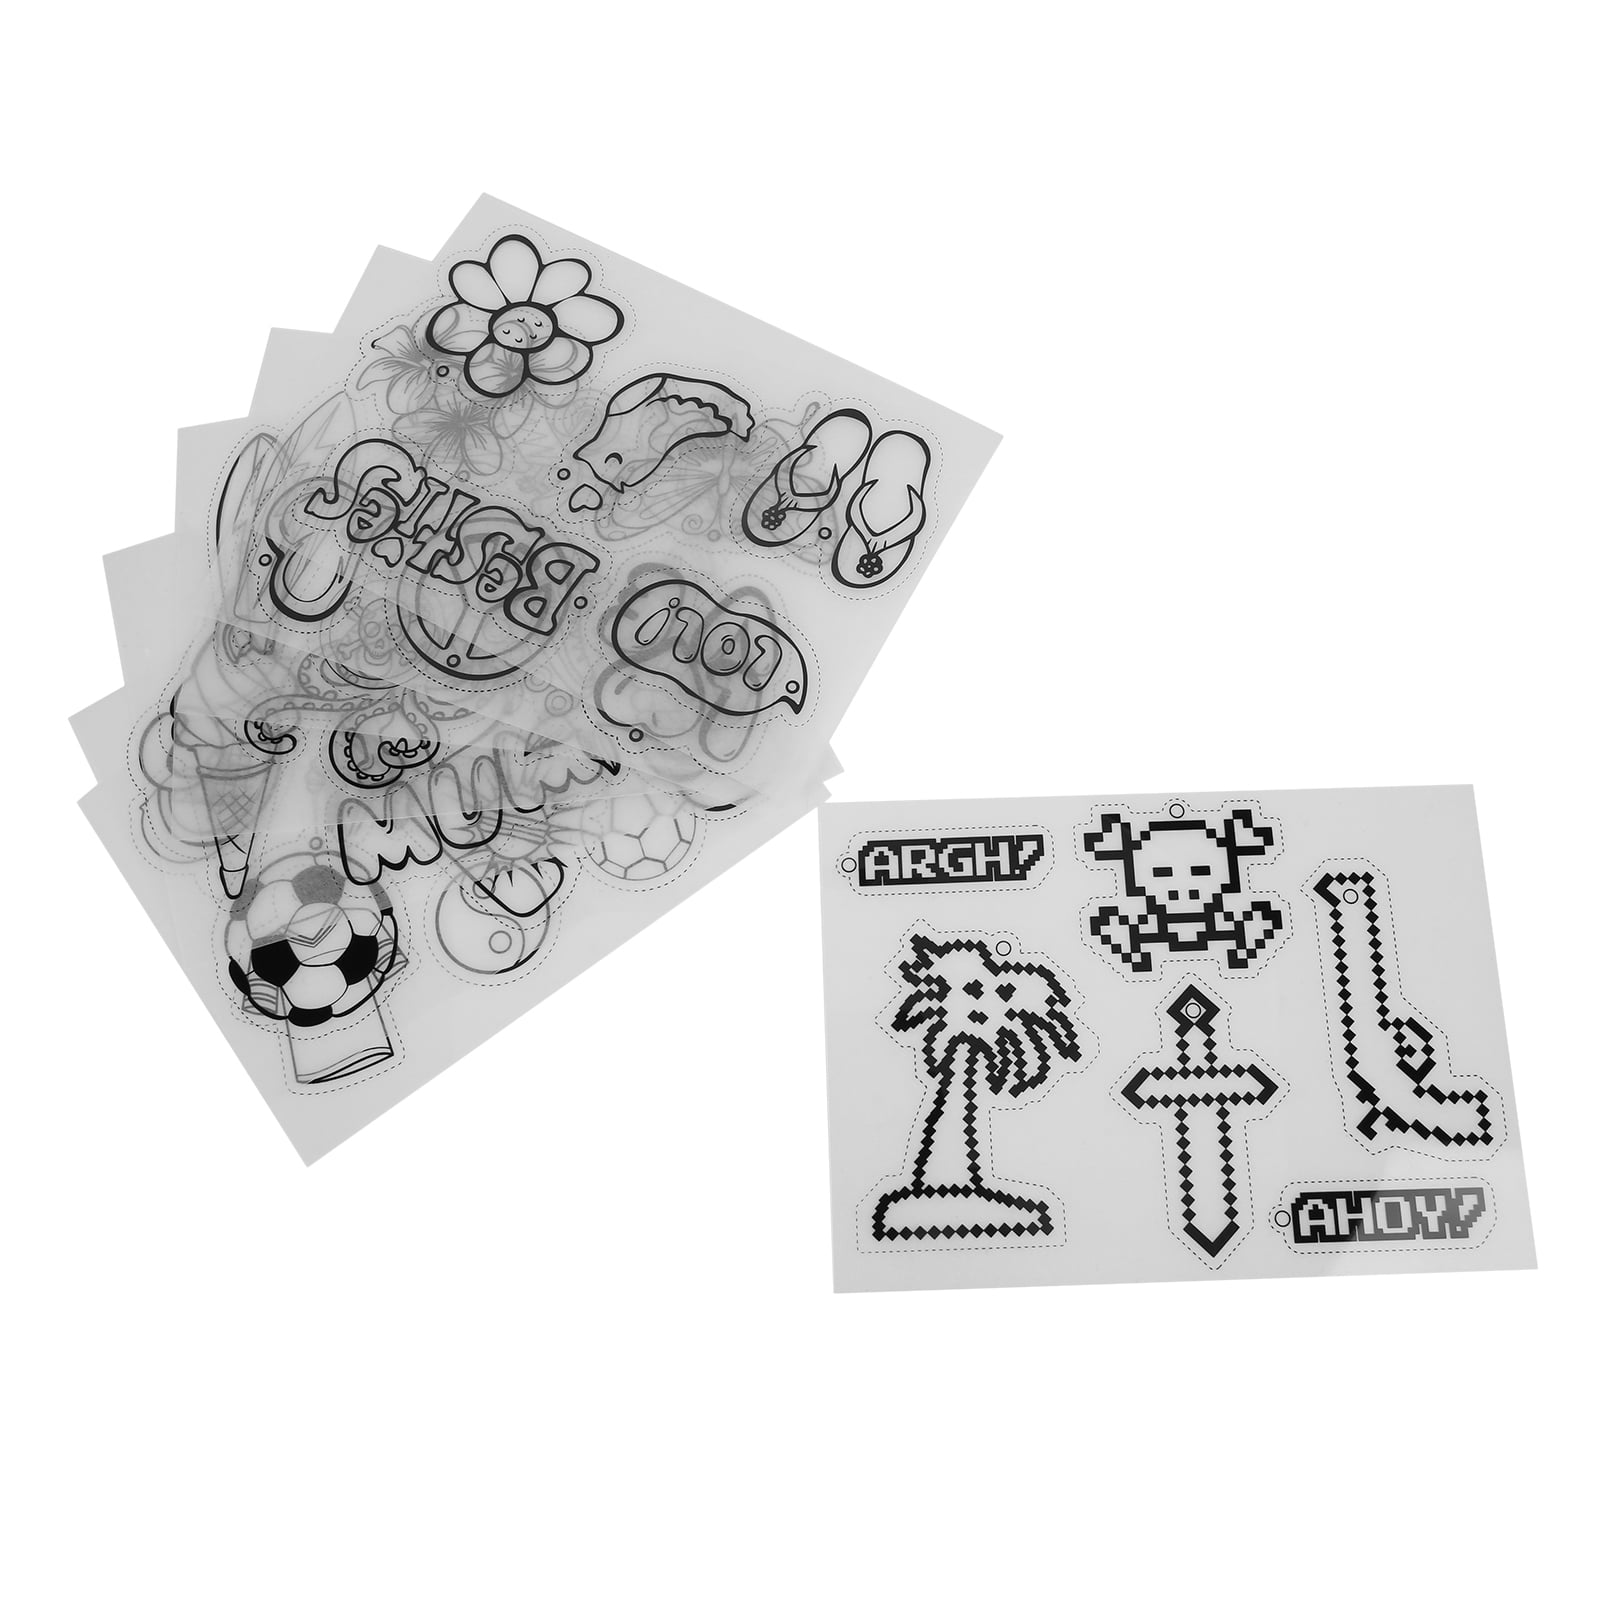 12pcs Shrinky Dink Papers, Heat Shrink Sheet Cartoon Christmas Series  Patterns Heat Shrinky Paper for DIY Keychain Pendant, Earrings and Other  Craft